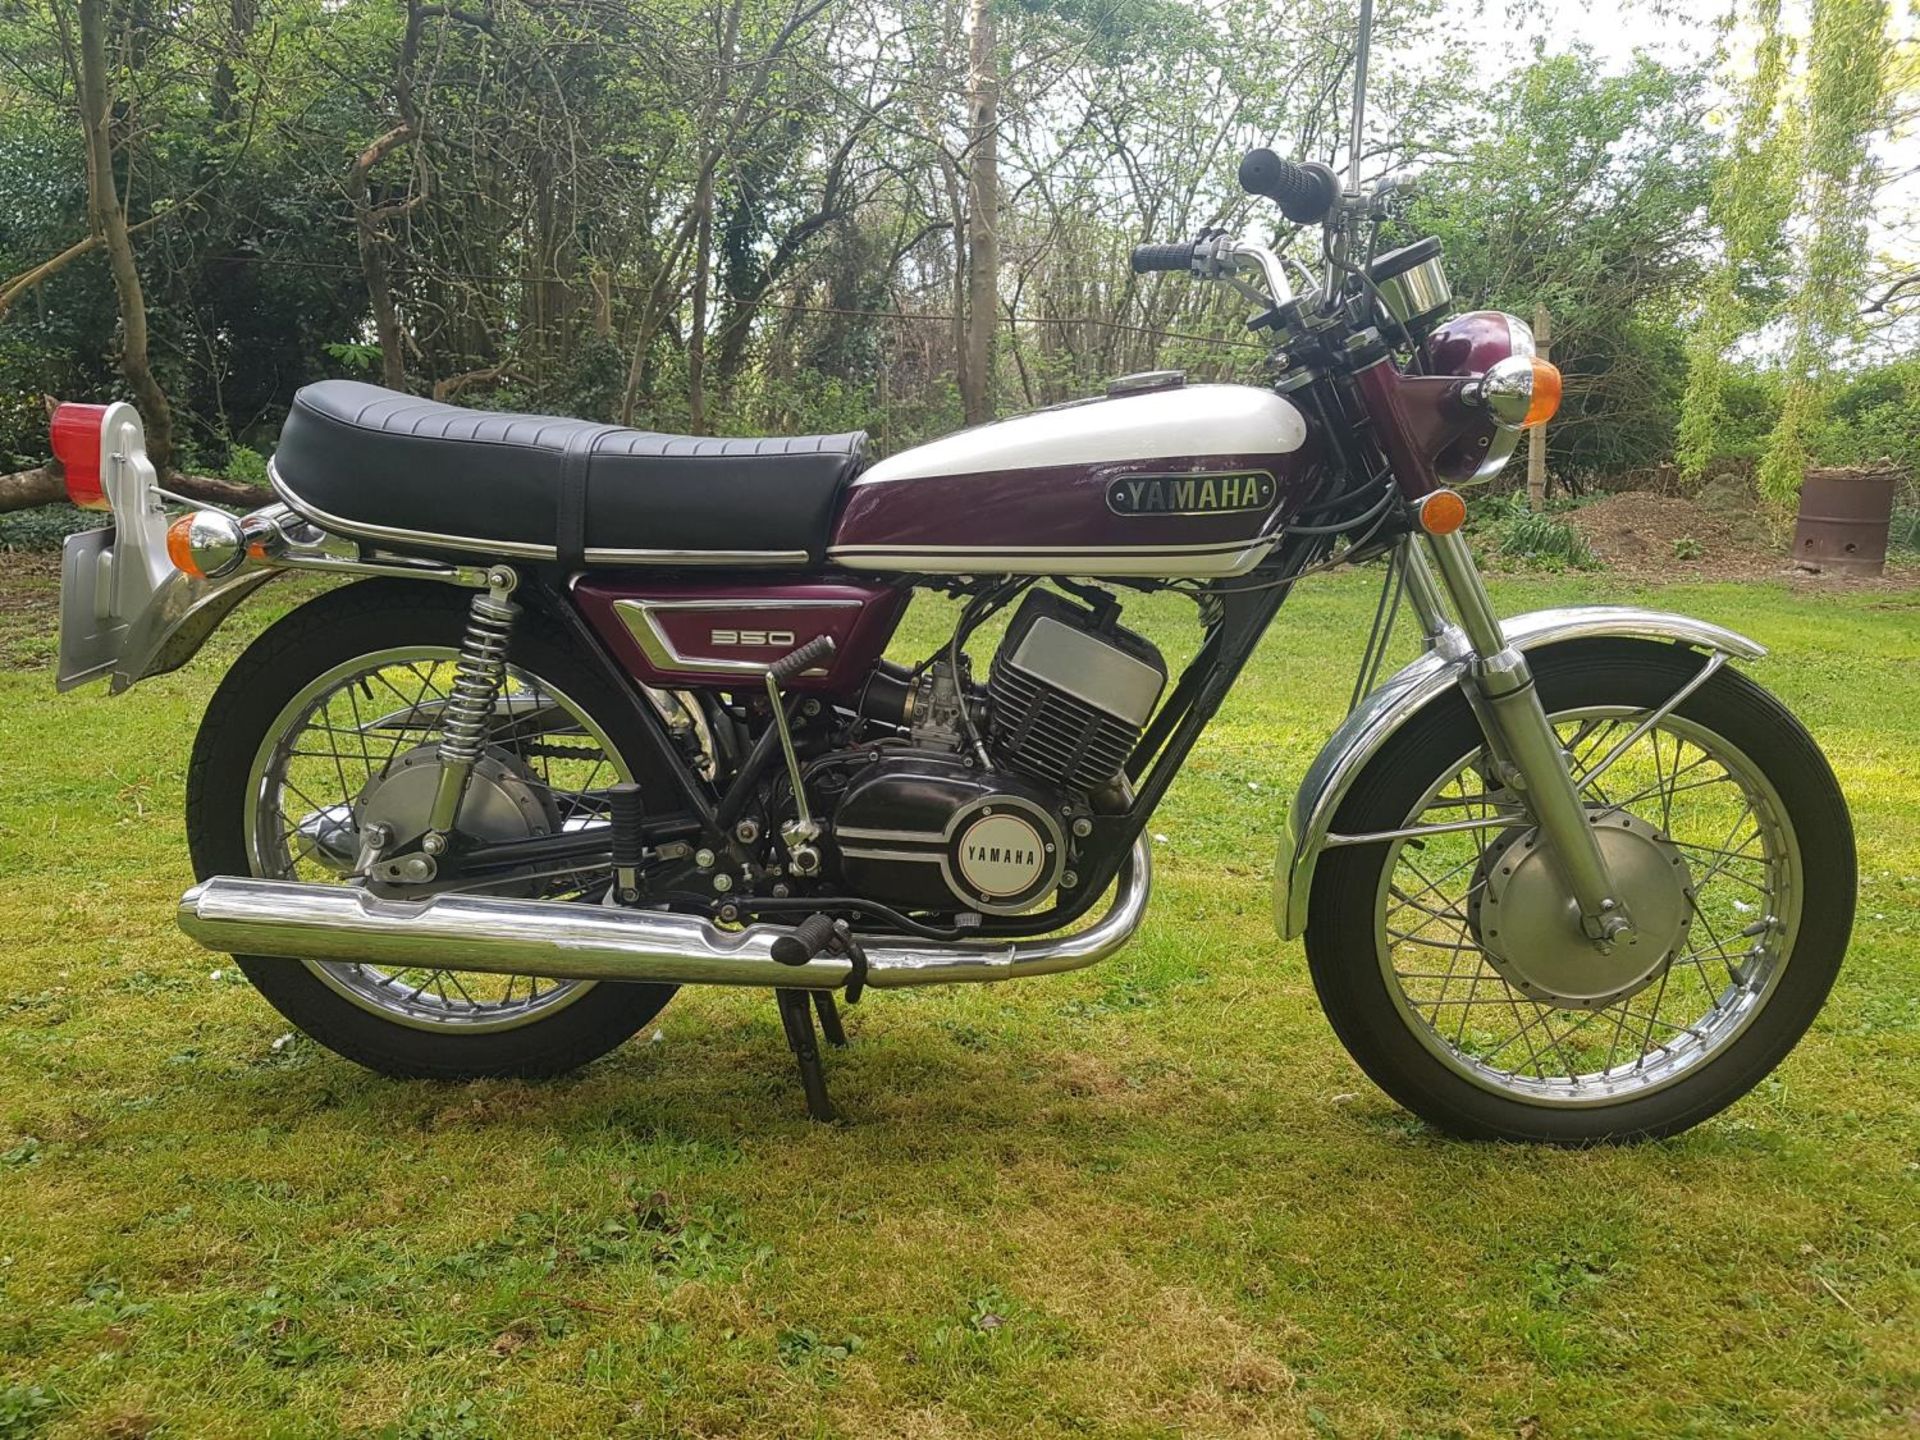 Yamaha YR5 motorcycle. 350cc. 1971. Matching numbers. Frame no.R5020669. Engine no. R5020669.